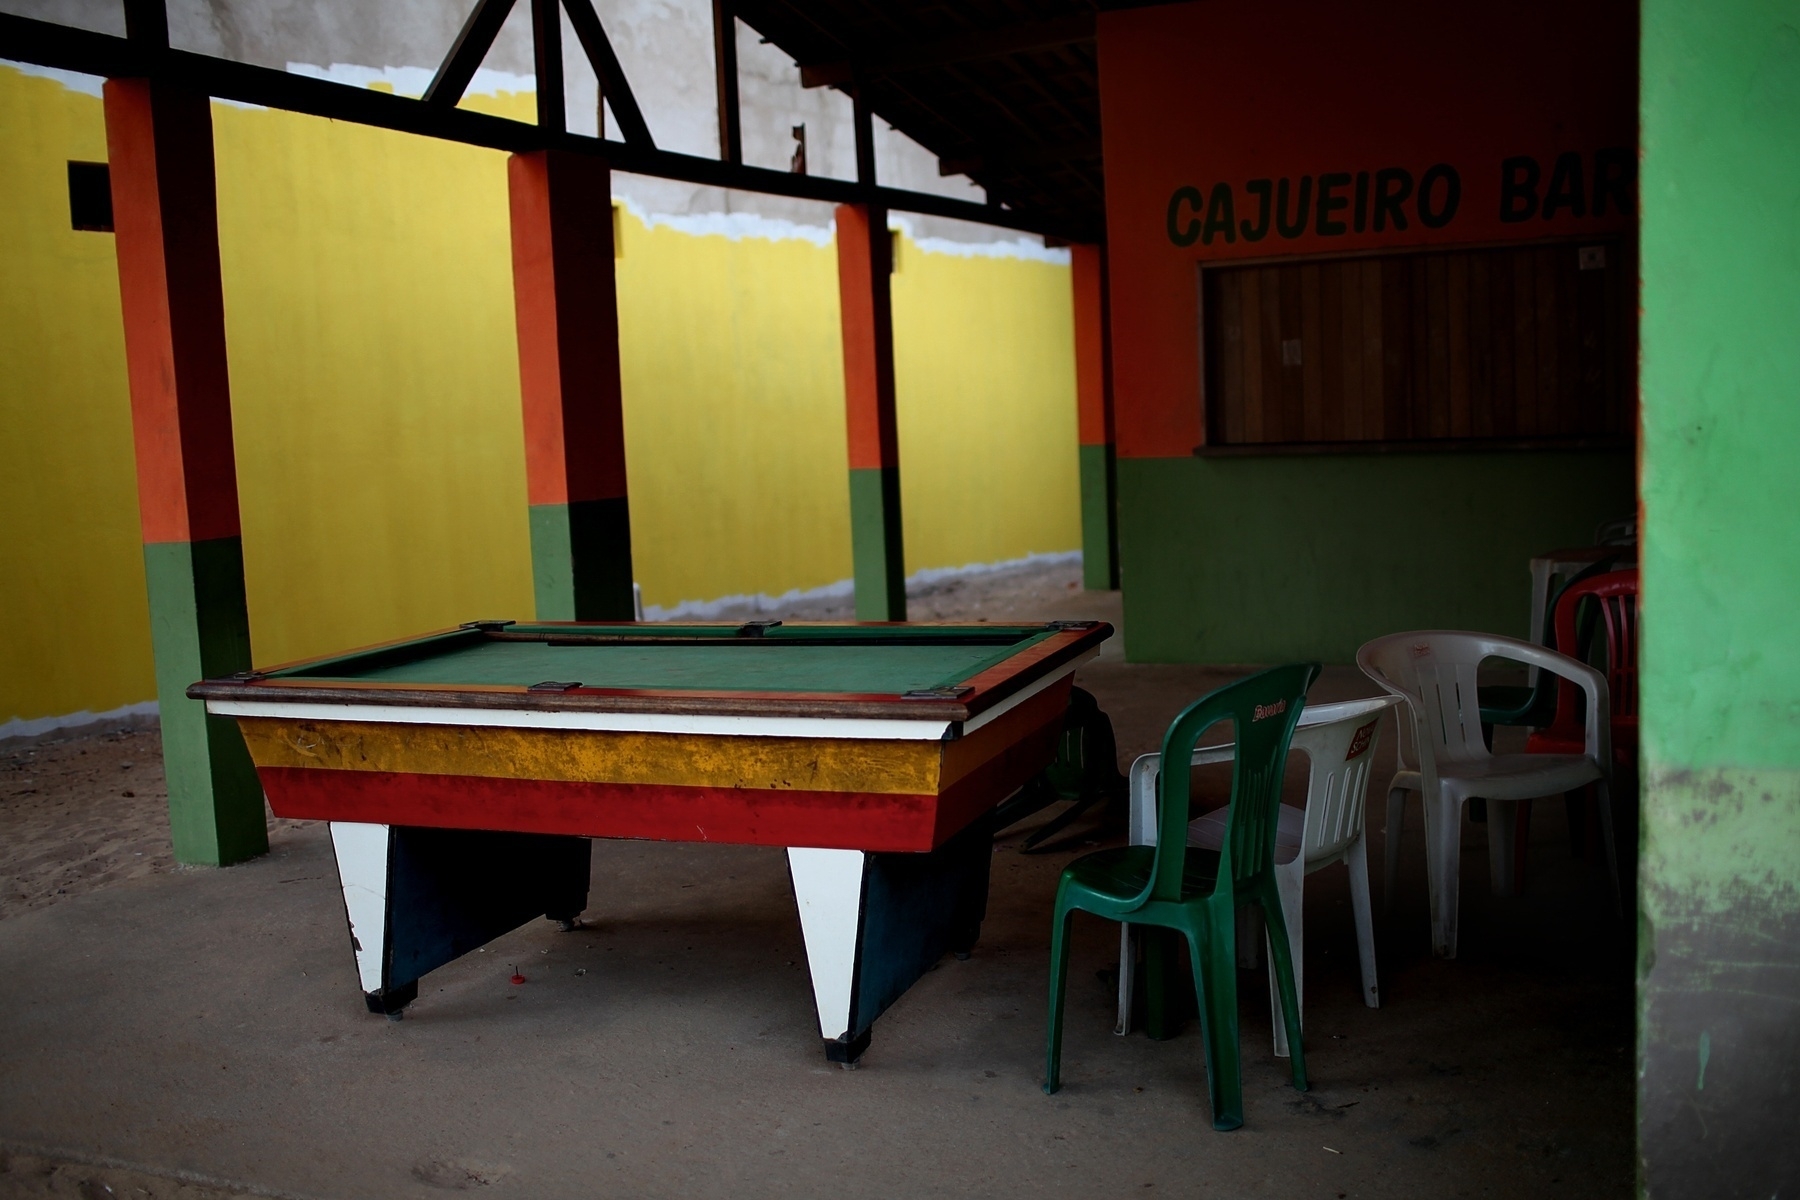 A colorful pool table sits in an empty bar.